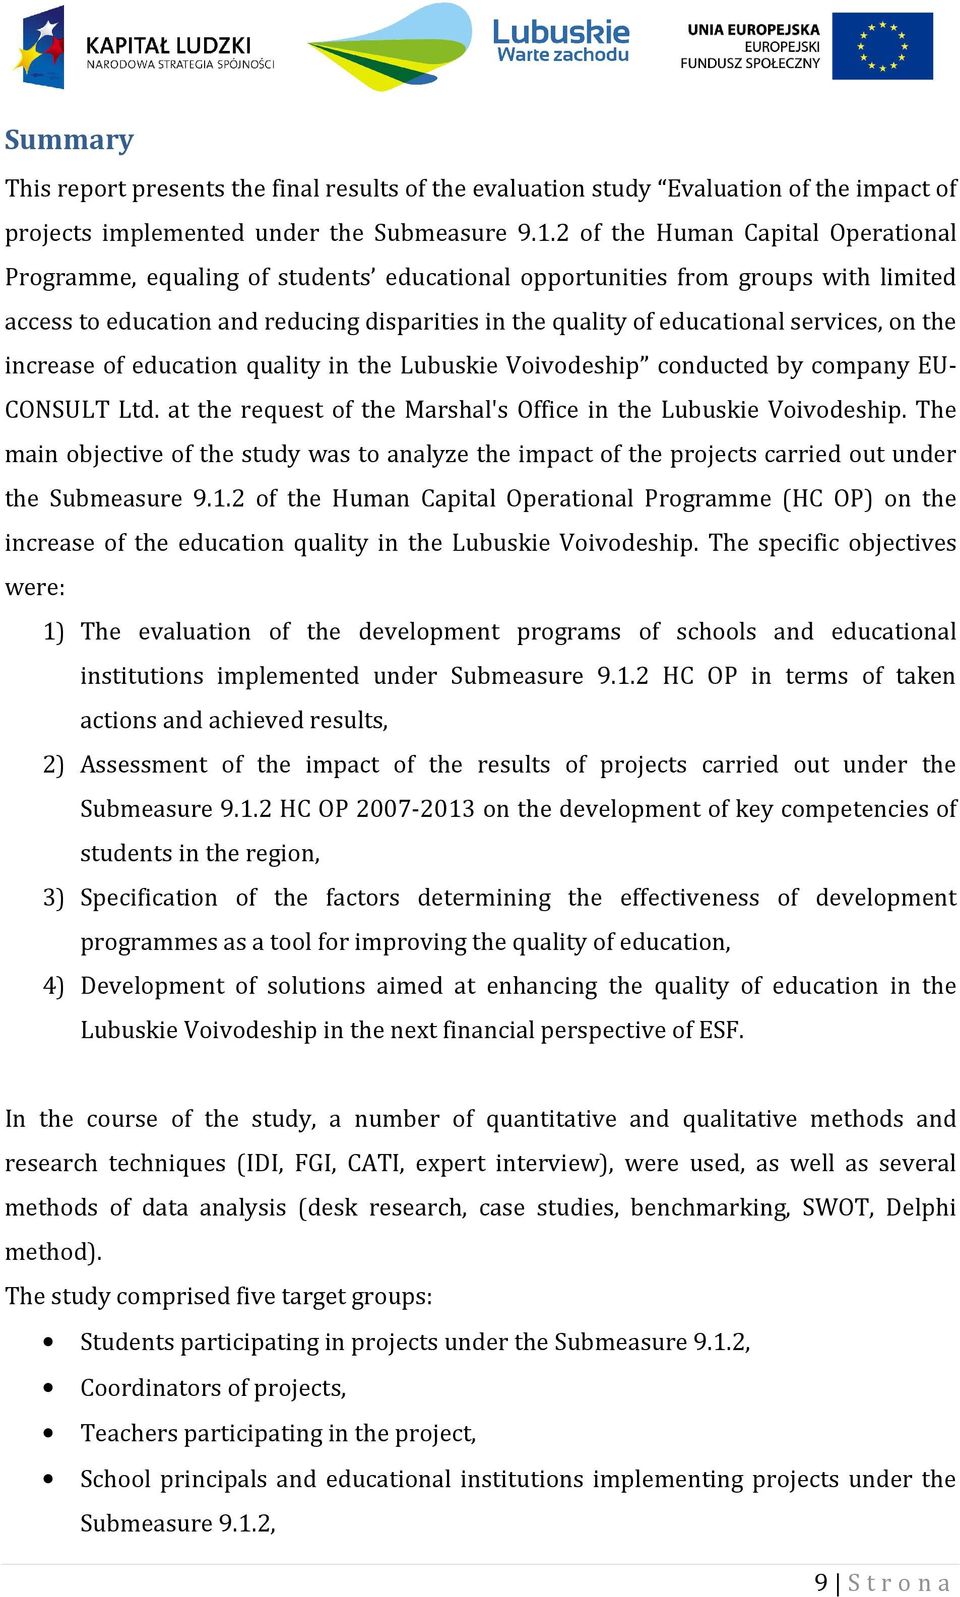 services, on the increase of education quality in the Lubuskie Voivodeship conducted by company EU- CONSULT Ltd. at the request of the Marshal's Office in the Lubuskie Voivodeship.